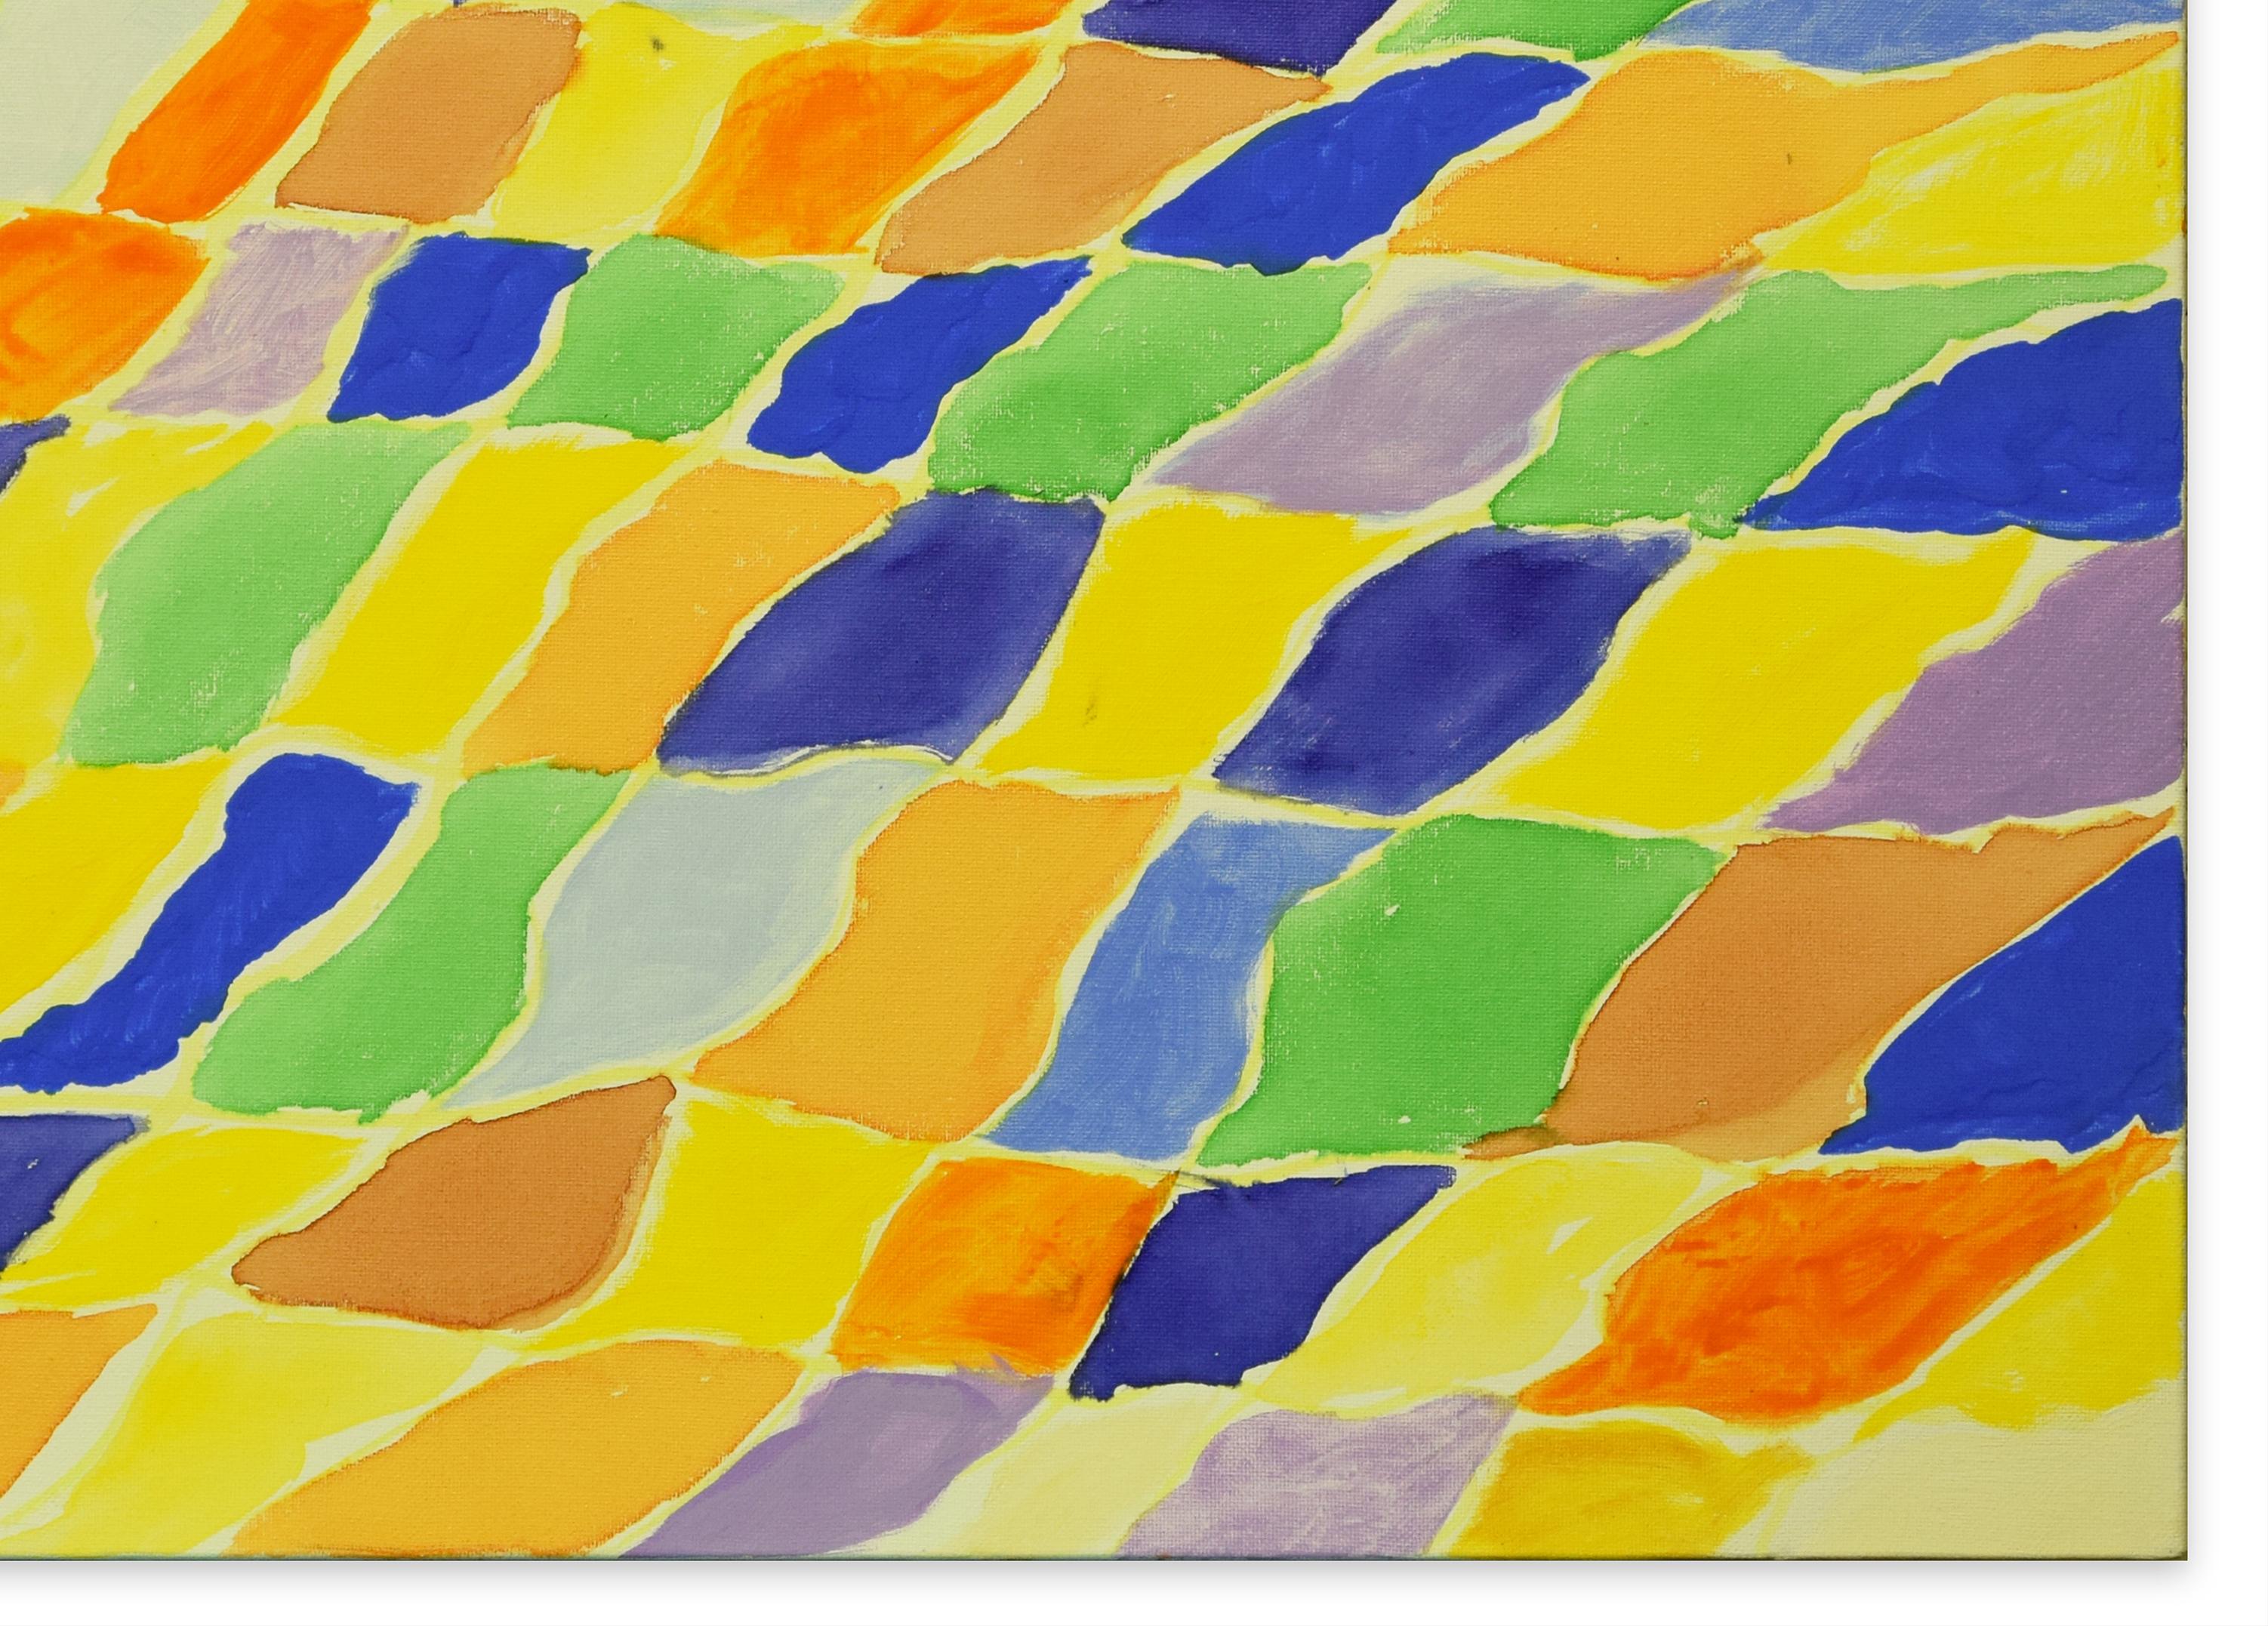 Reticulum is an original artwork realized by Giorgio Lo Fermo in 2019.

Original colored oil on canvas.

Hand-signed on the back.

Reticulum is a beautiful example of contemporary abstract art representing a very colorful lattice.

Giorgio Lo Fermo